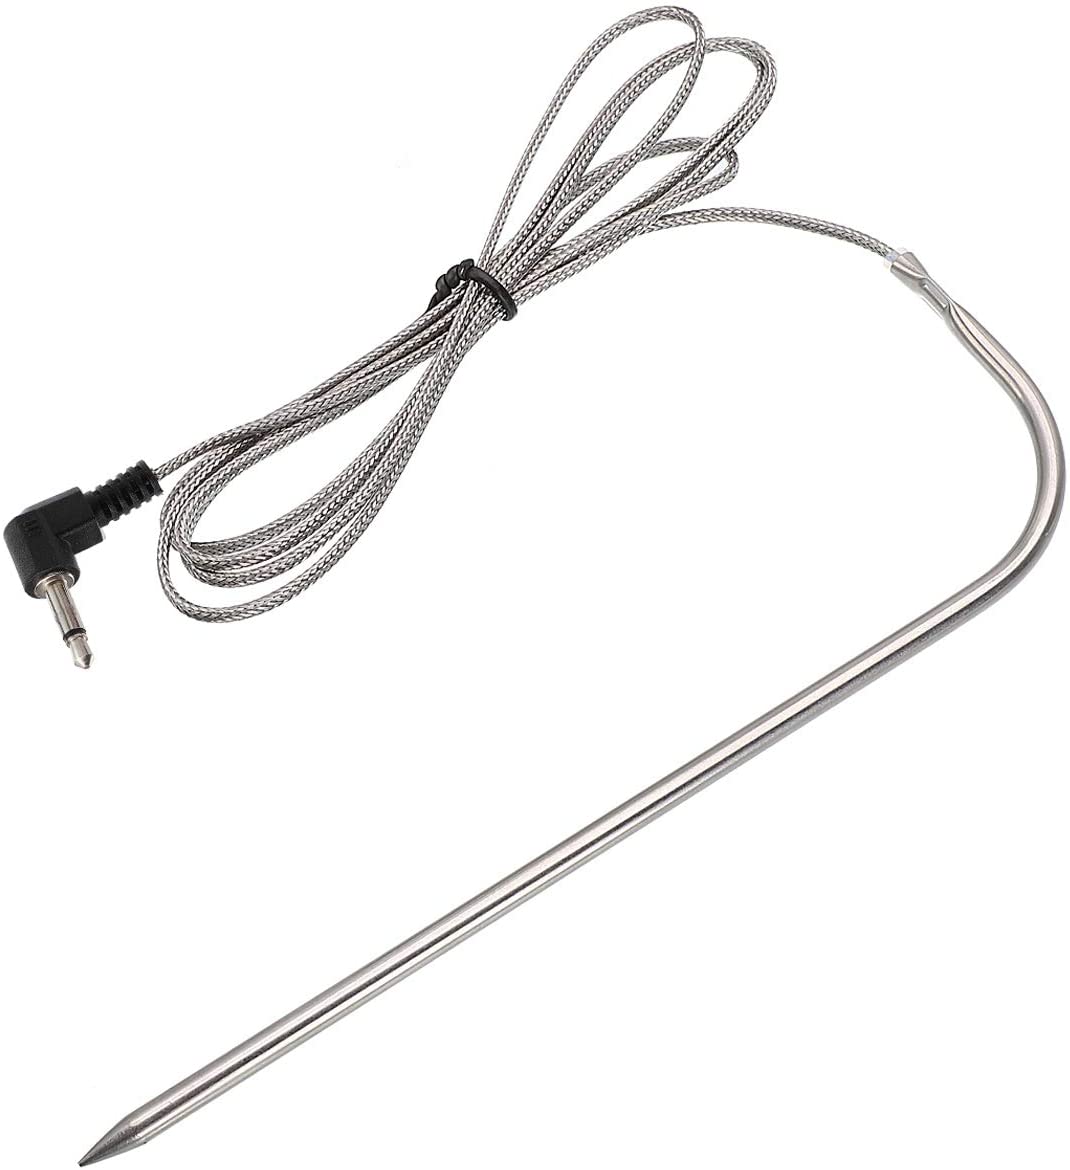 Pit Boss Grills Grill Probe and Extension Wire – Molex Type